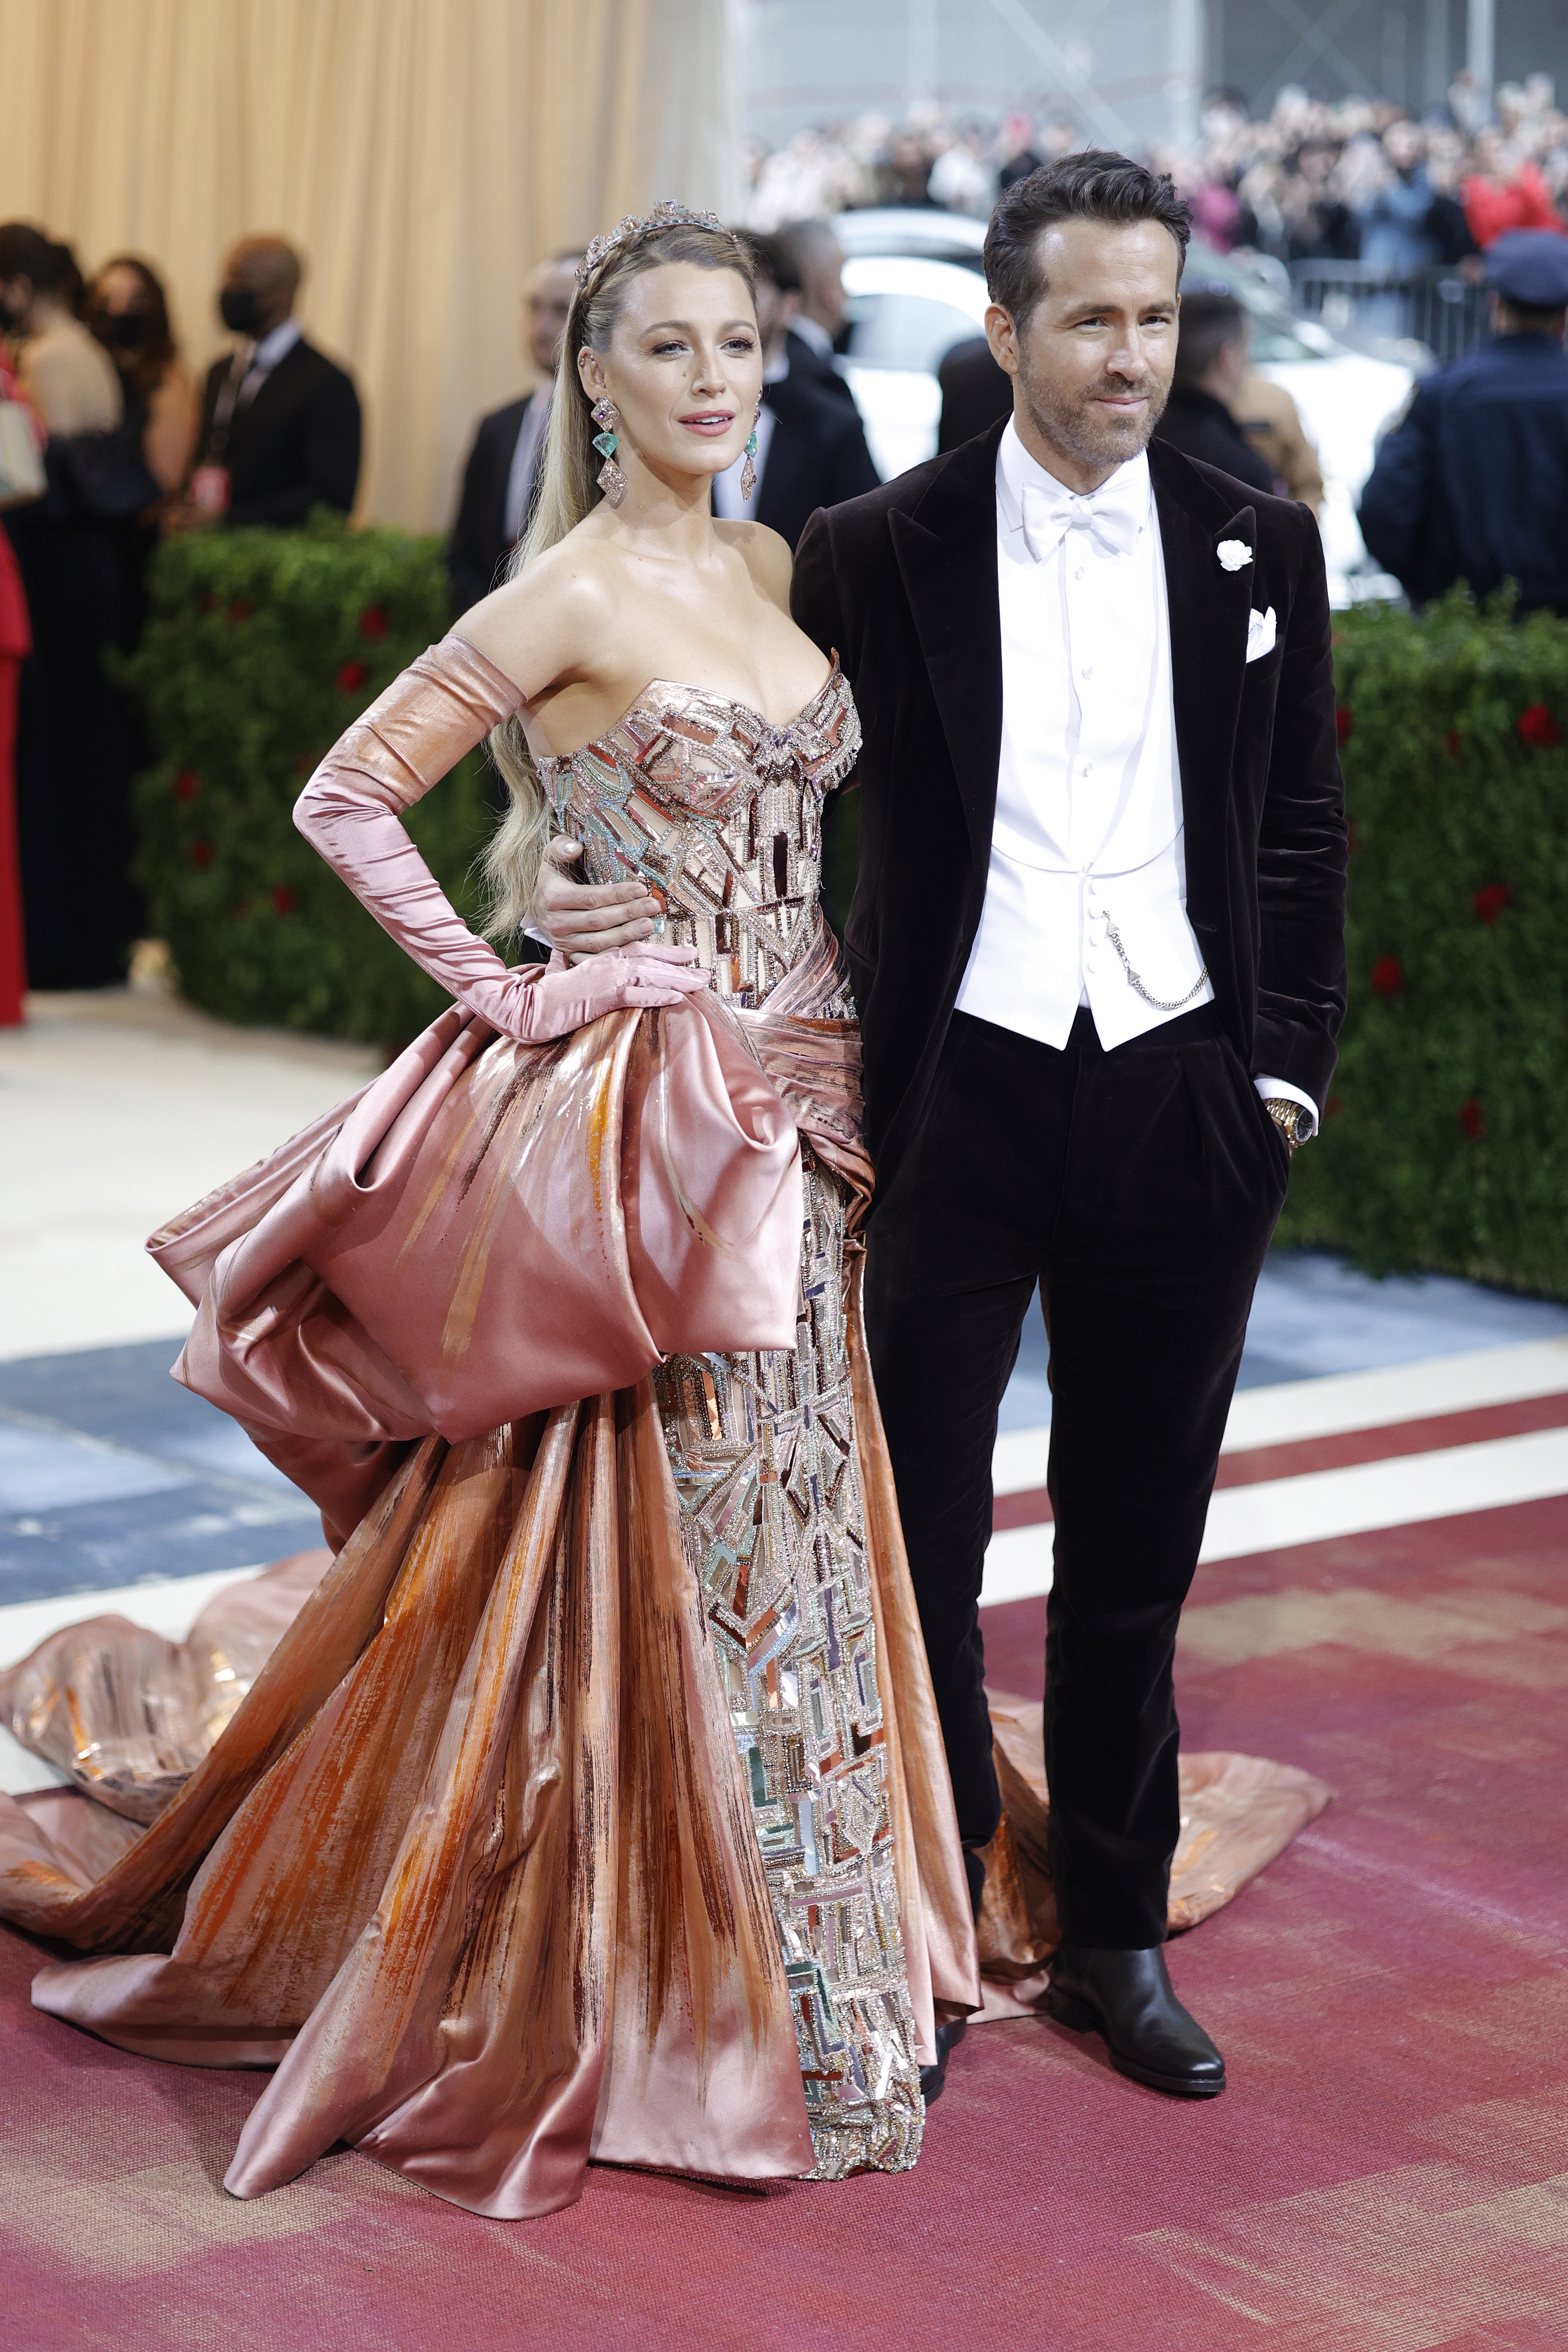 Met Gala 2022: All the Best Dressed Celebrities on the Red Carpet